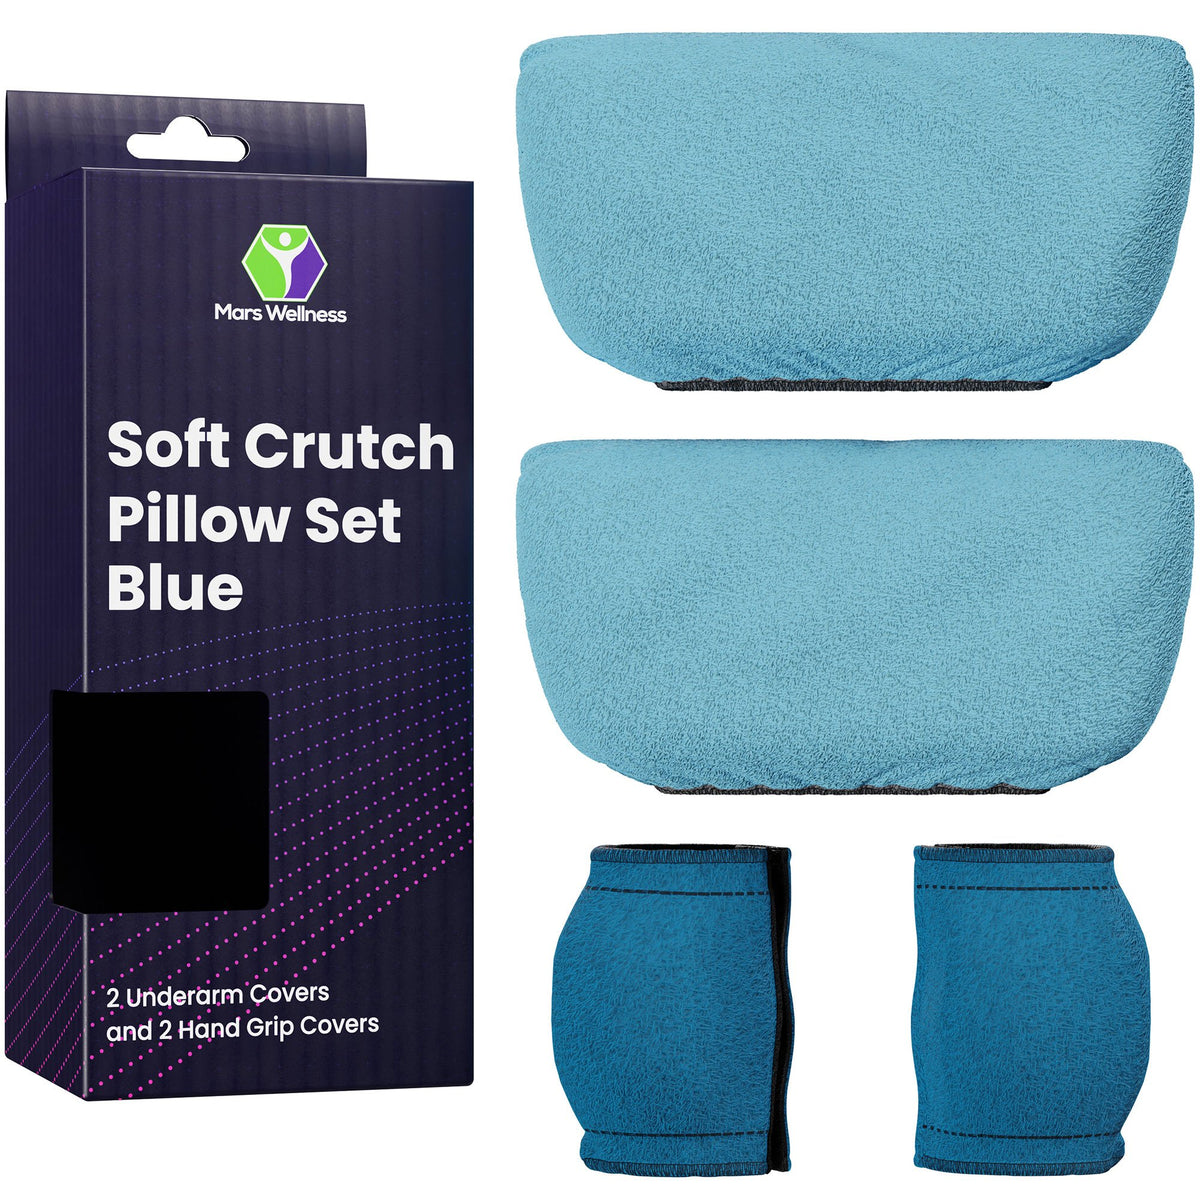 Crutch Pillows Set - Moisture Wicking Under Arm Crutches - Blue - Handle Pillow Covers for Hand Grips - Crutch Pads Fits Standard Crutches - Machine Washable & Latex Free Crutches for Adults, Youth